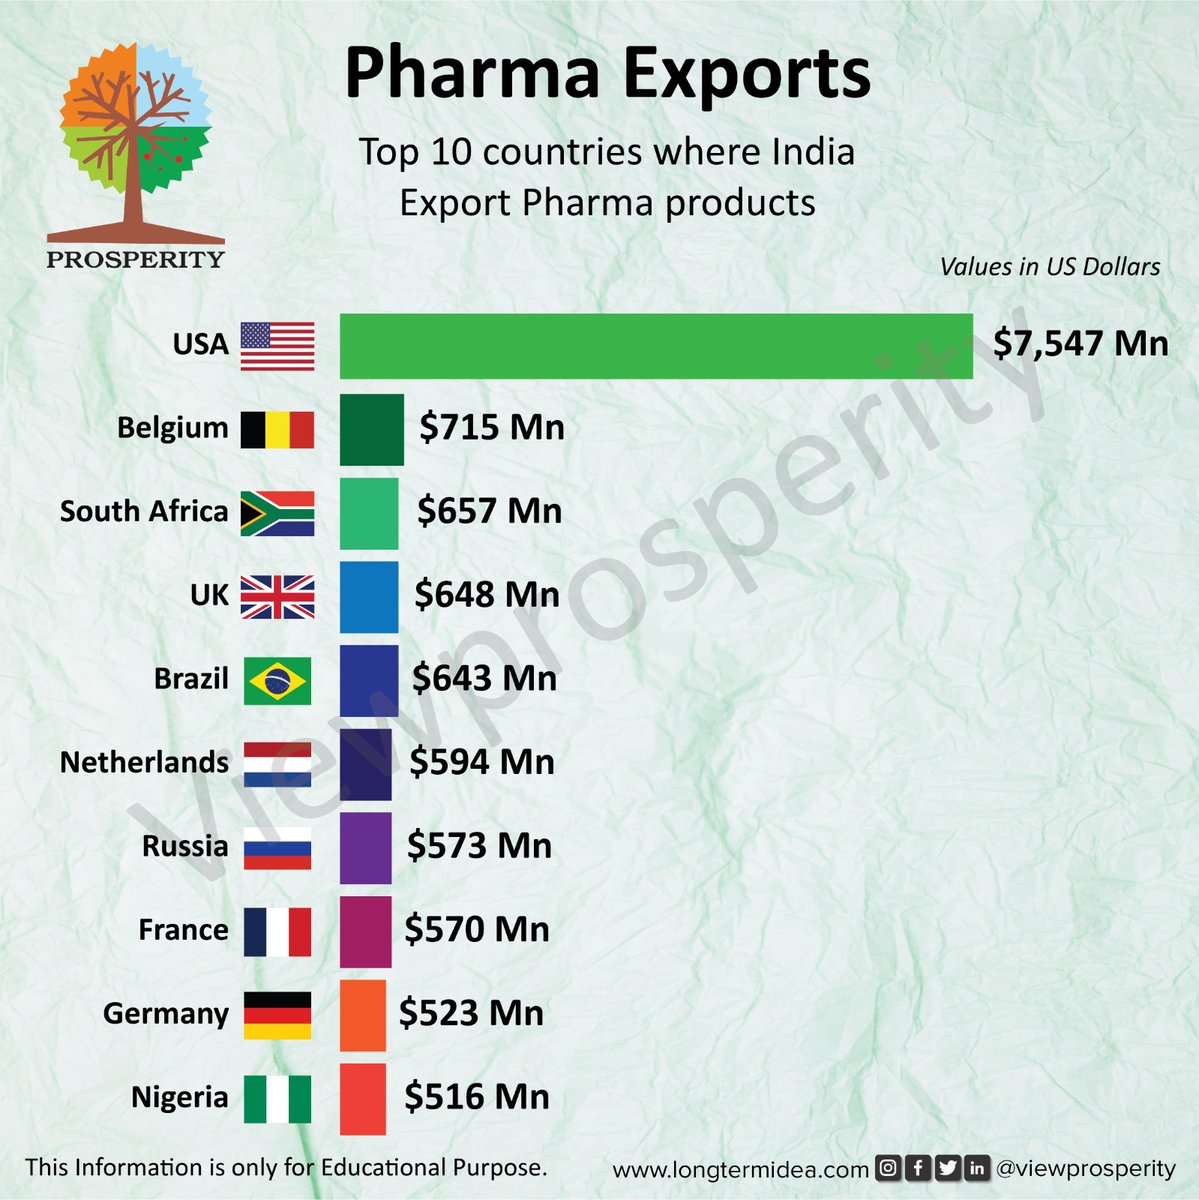 Pharma Exports-Top 10 countries where India Export Pharma Products!
Follow us @viewprosperity for informative Updates.
#usa #belgium #southafrica #uk #brazil #netherlands #russia #france #germany #nigeria #export #pharmaexport #viewprosperity #investinindia #instagramhacked